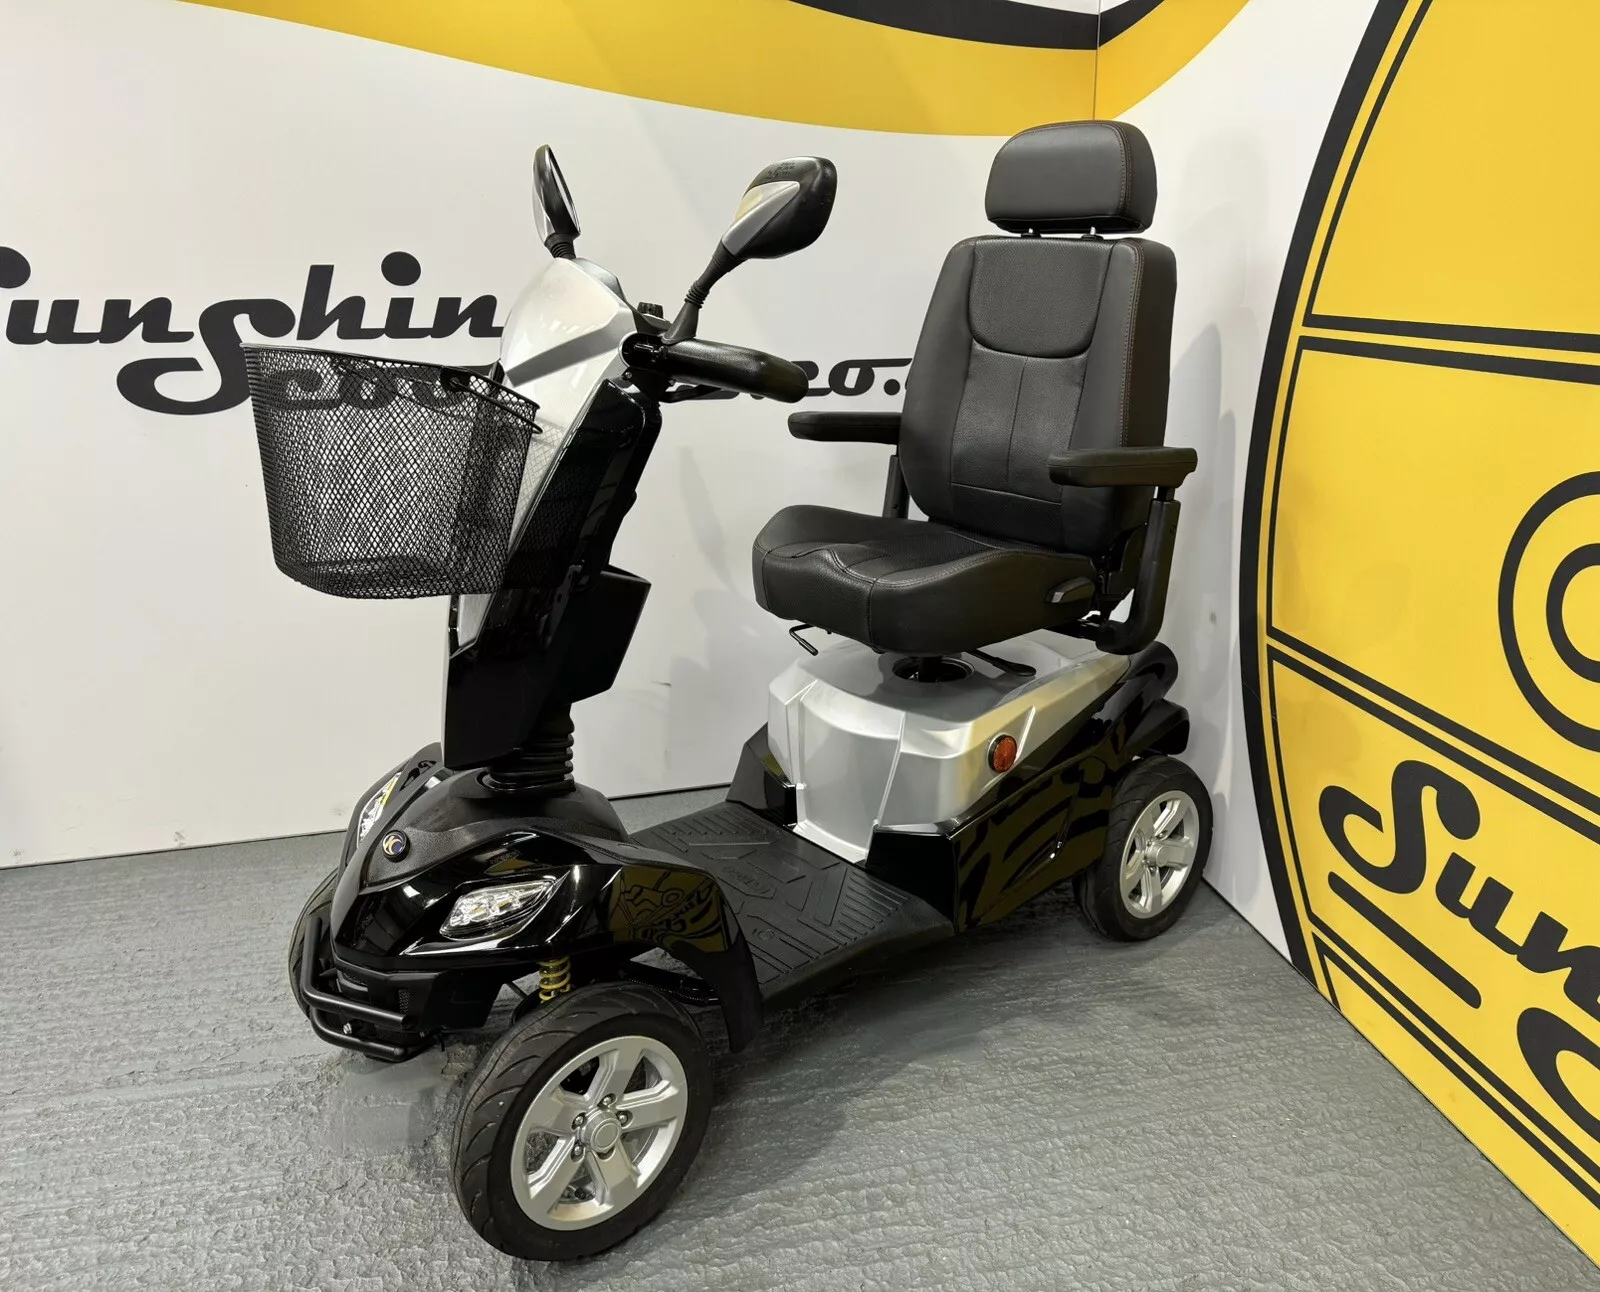 Kymco Maxer Electric Mobility Scooter